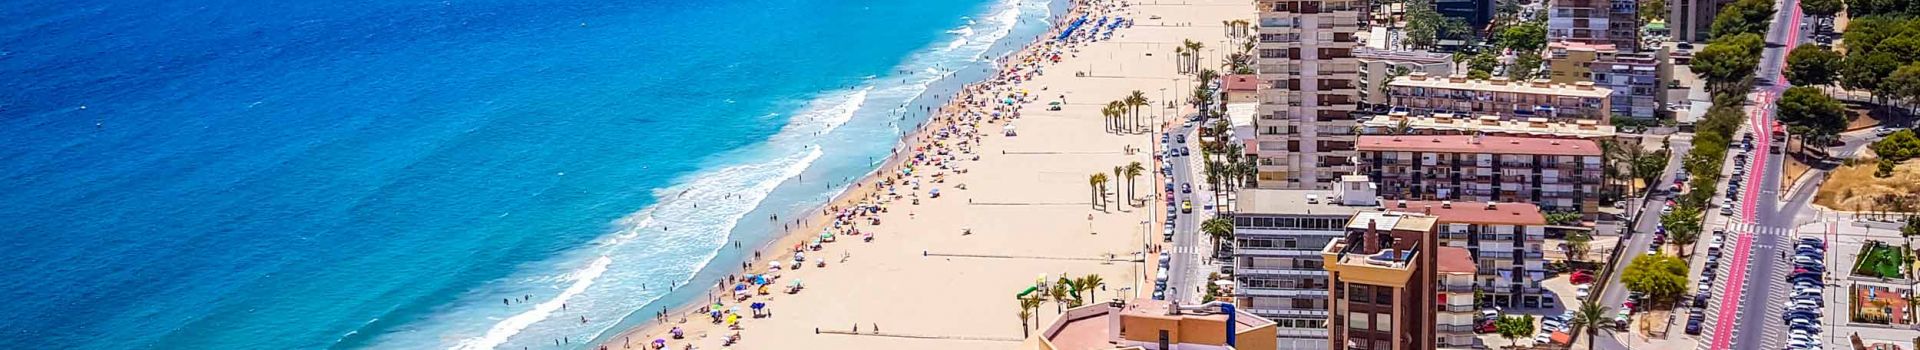 Cheap holidays from Shannon to Benidorm with Cassidy Travel